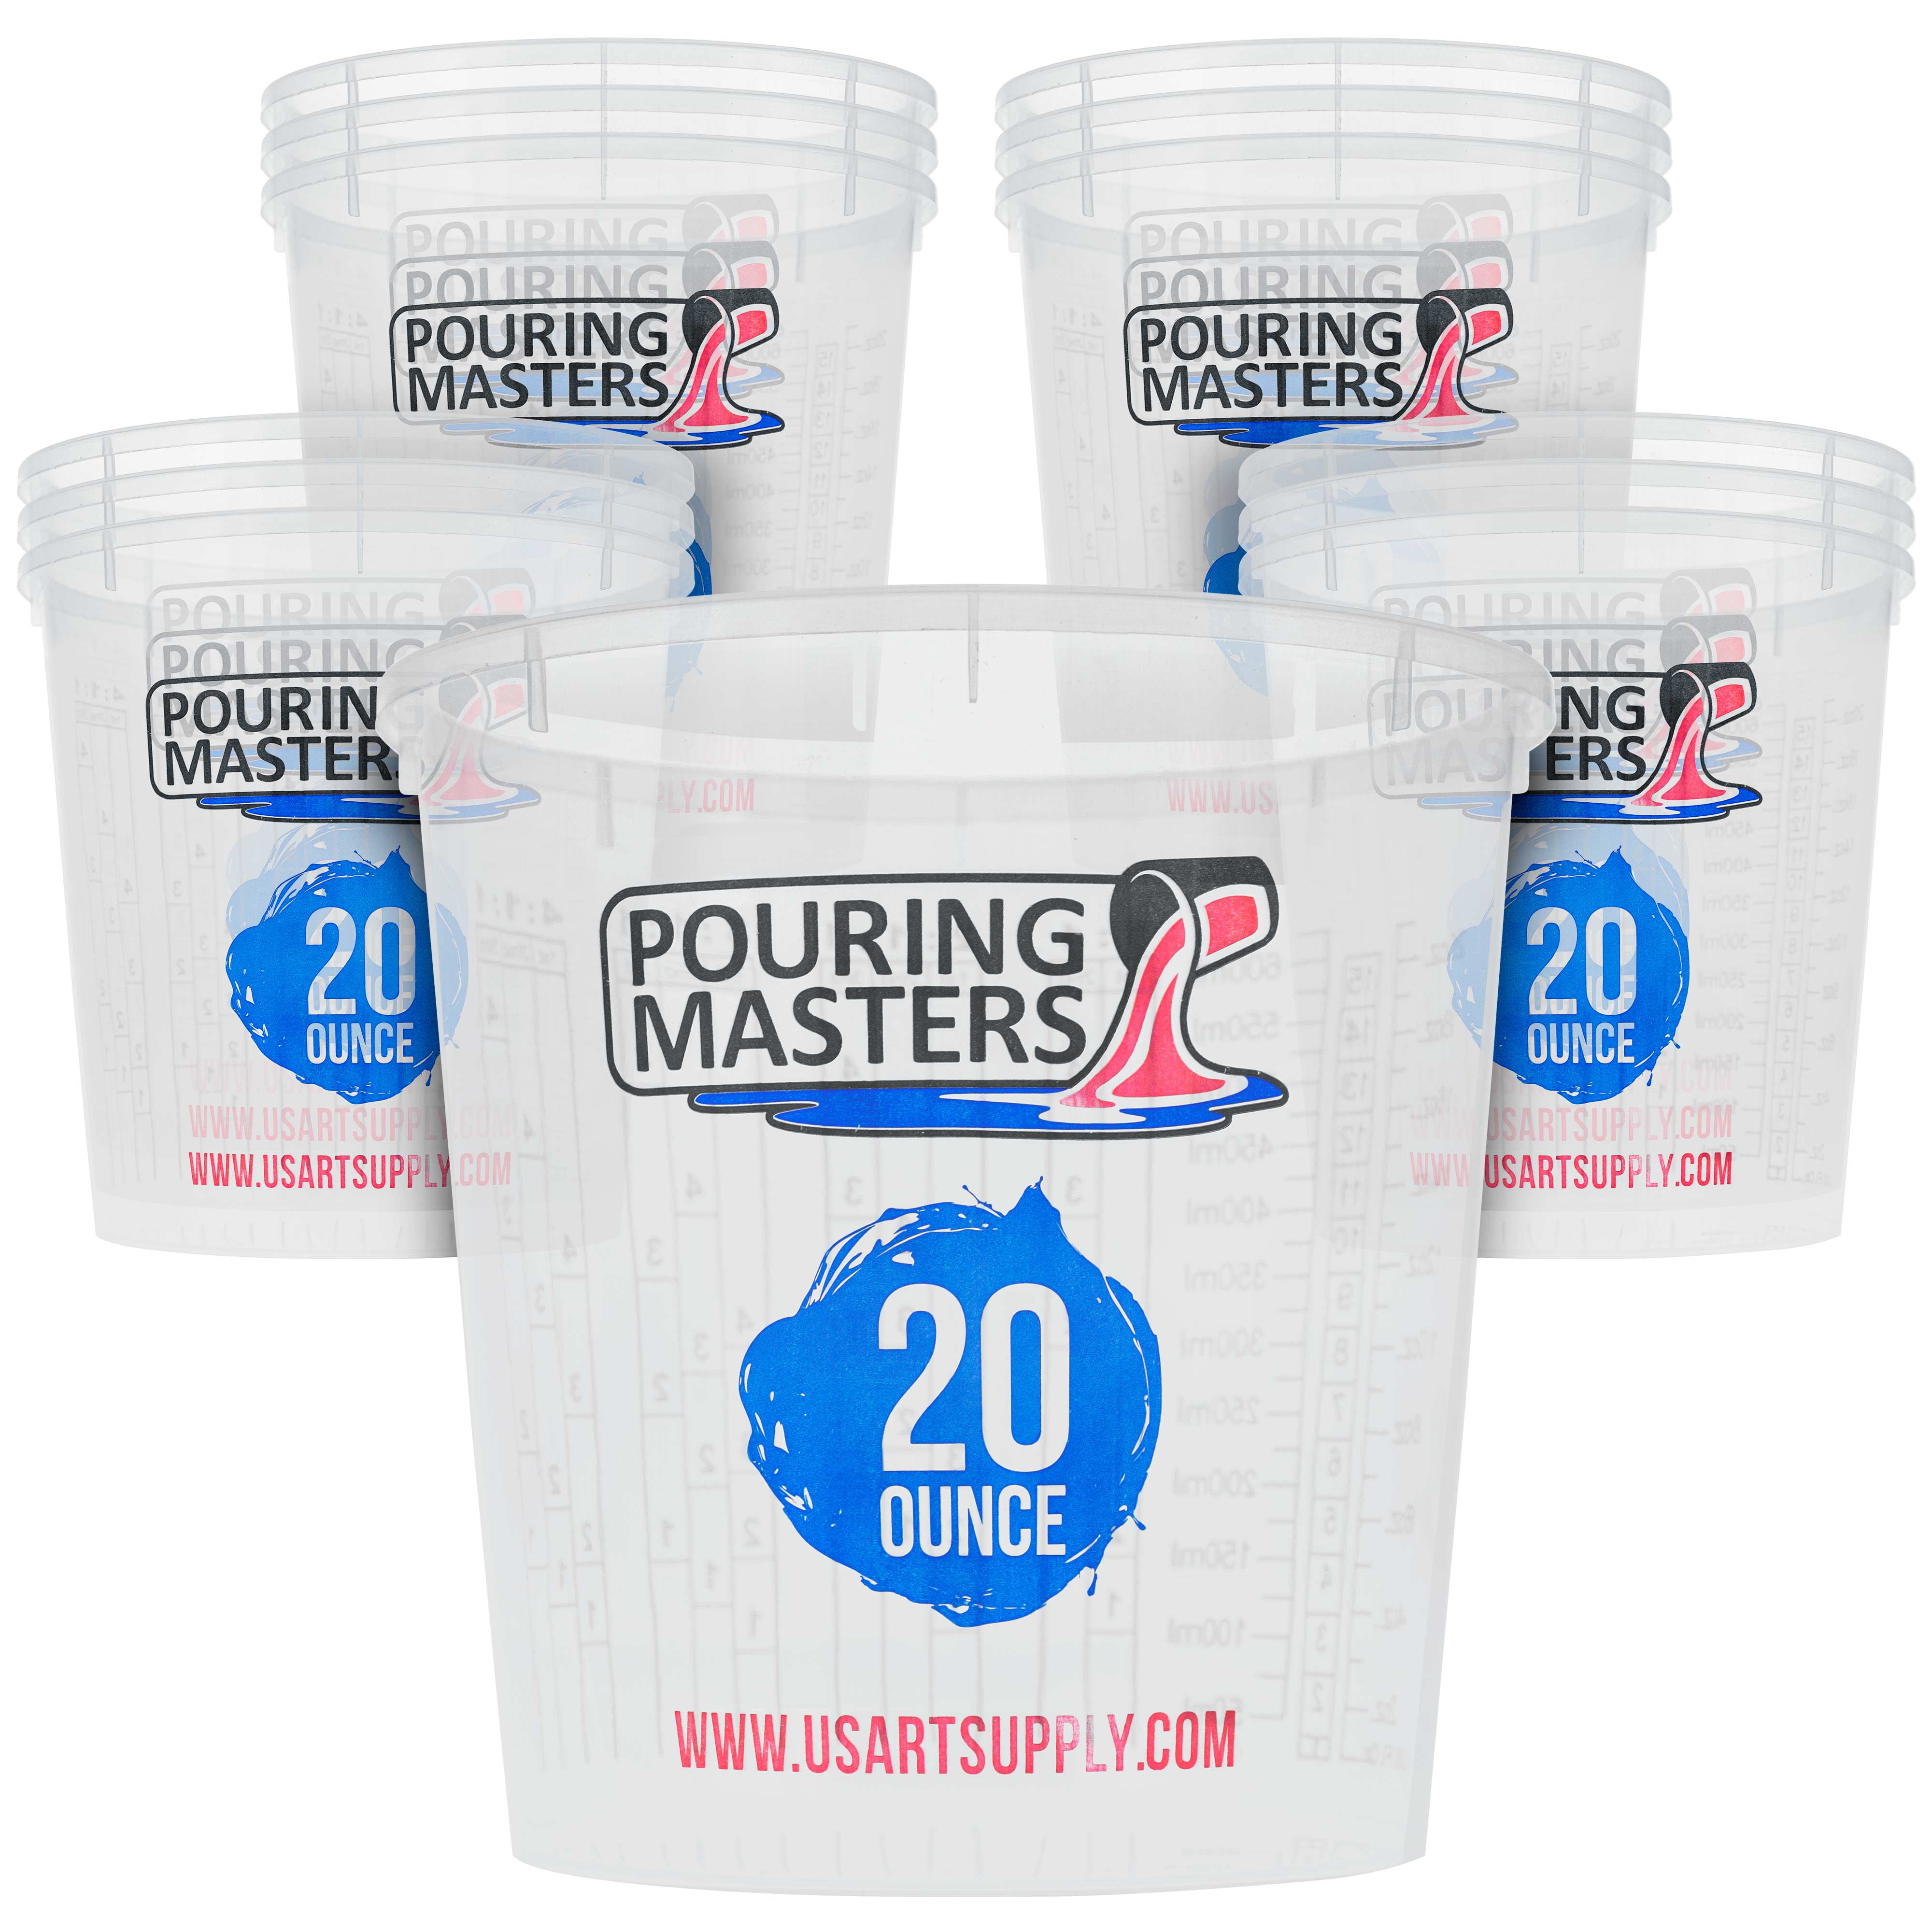 Pouring Masters Ultimate Paint Mixing Cup Kit - 12 Plastic Graduated Mixing  Cups, 4 Cup Sizes - 12 Sticks, 12 Strainers, 2 Tack Cloths, Mixer Blade